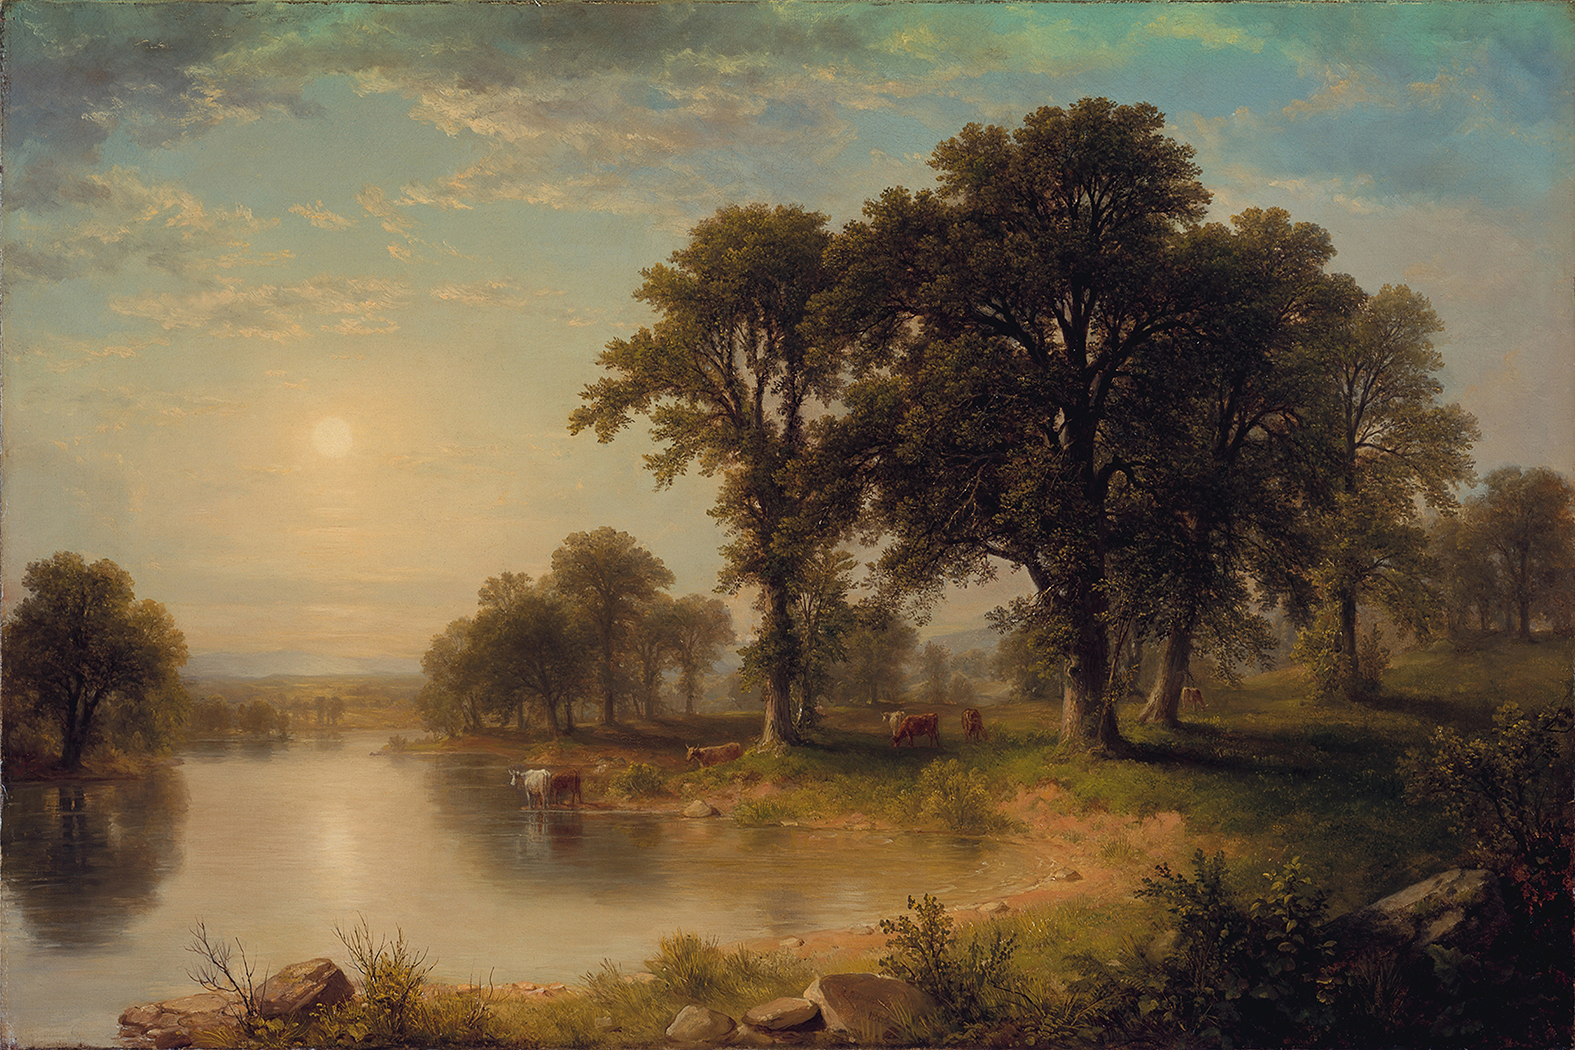 Farm/Pastoral Early American On the Banks of the River Landscape Oi ...